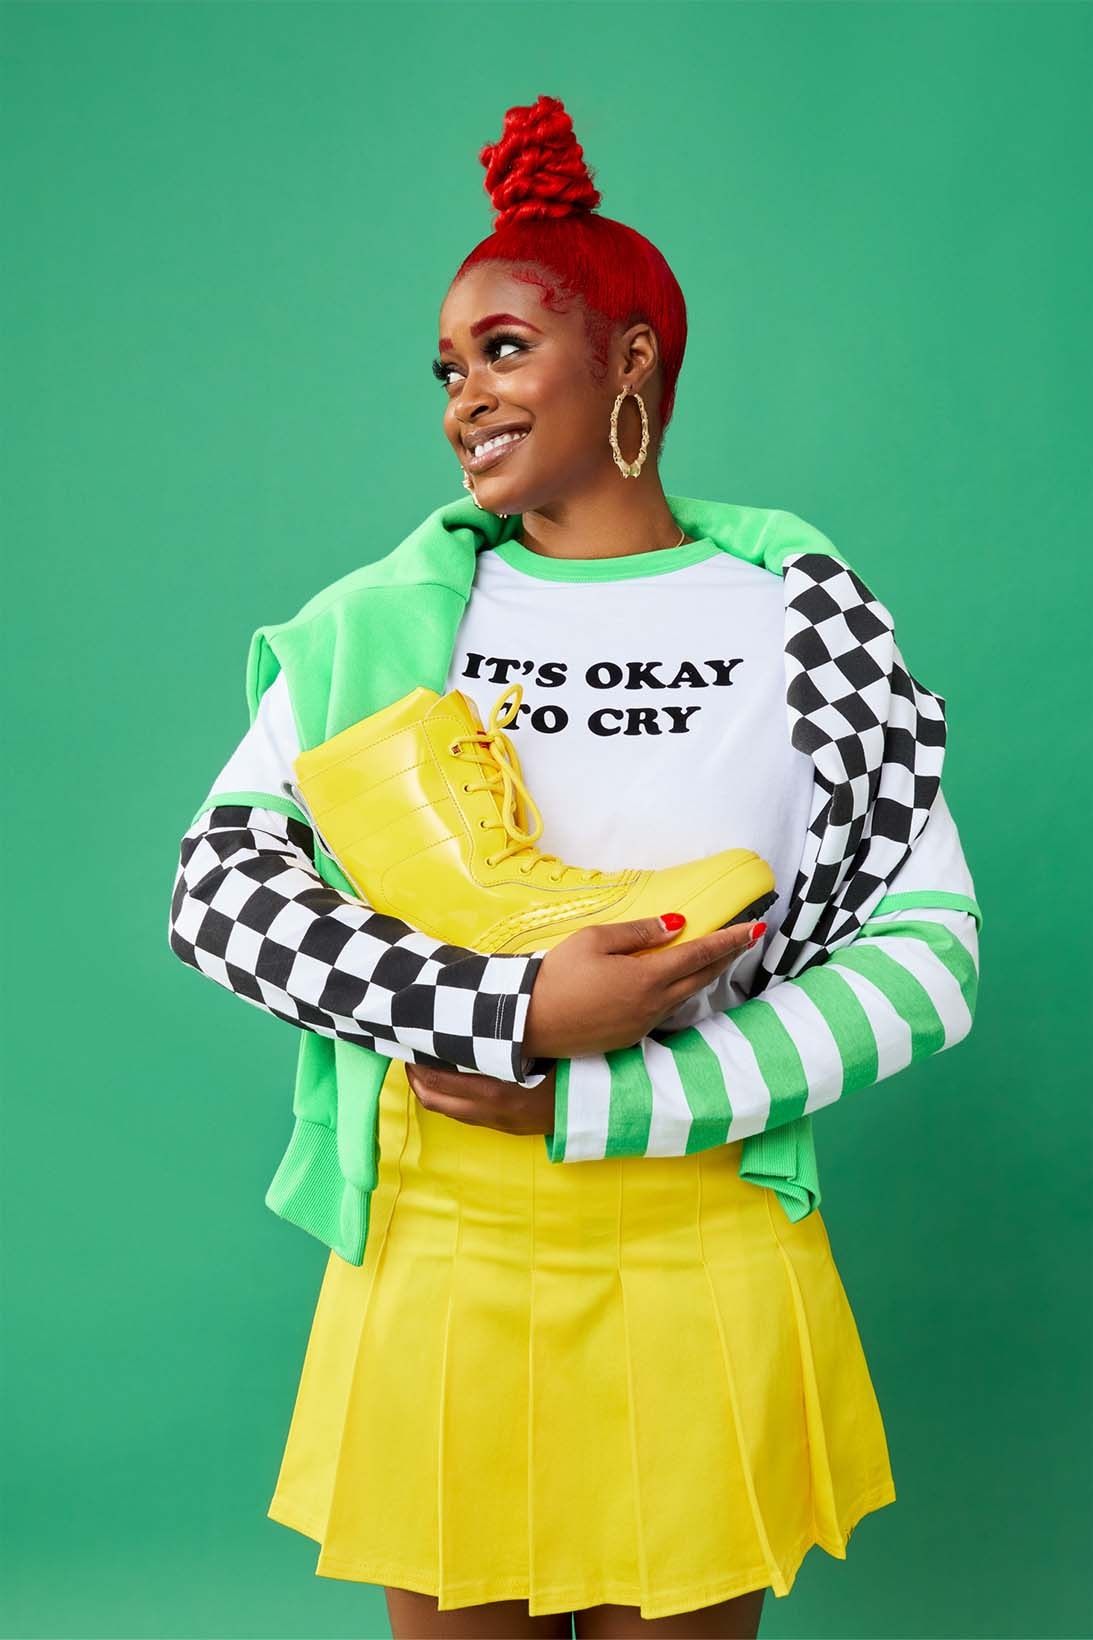 Tierra Whack Vans It's Okay to Cry Shirt Standard Snow MTE Yellow Collaboration Release Date